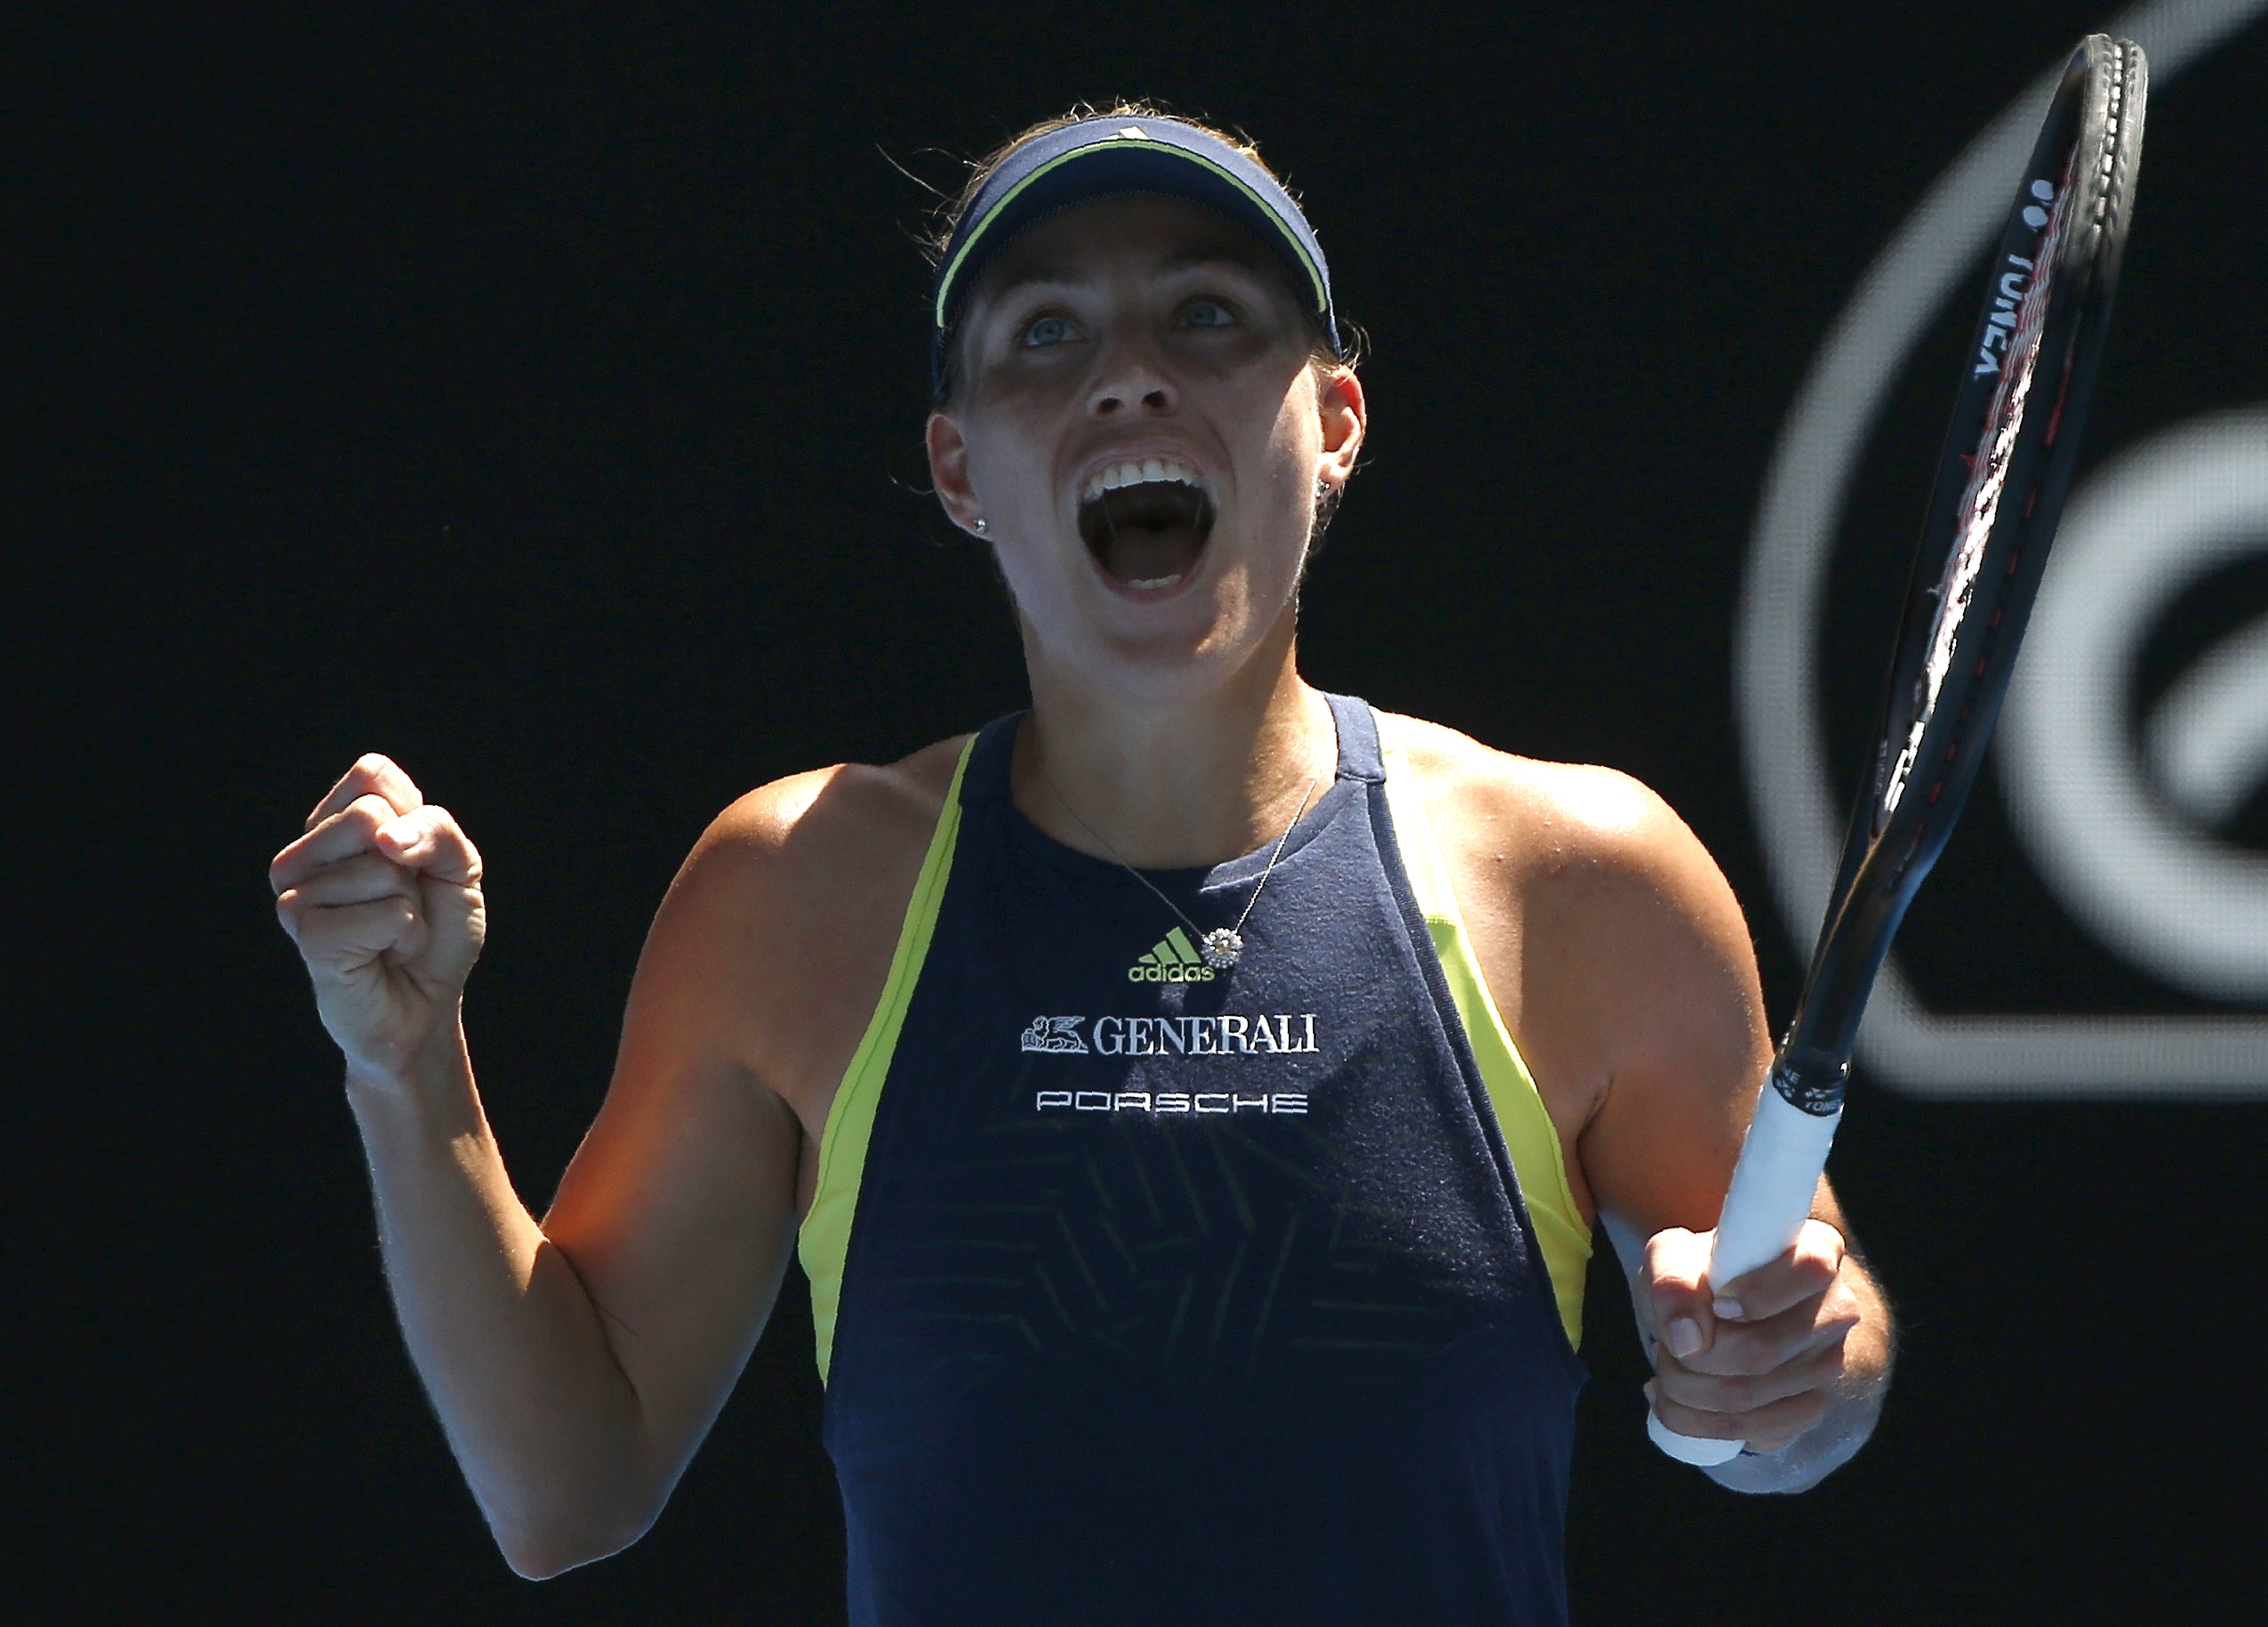 Tennis: Kerber back in quarterfinals club after tough year